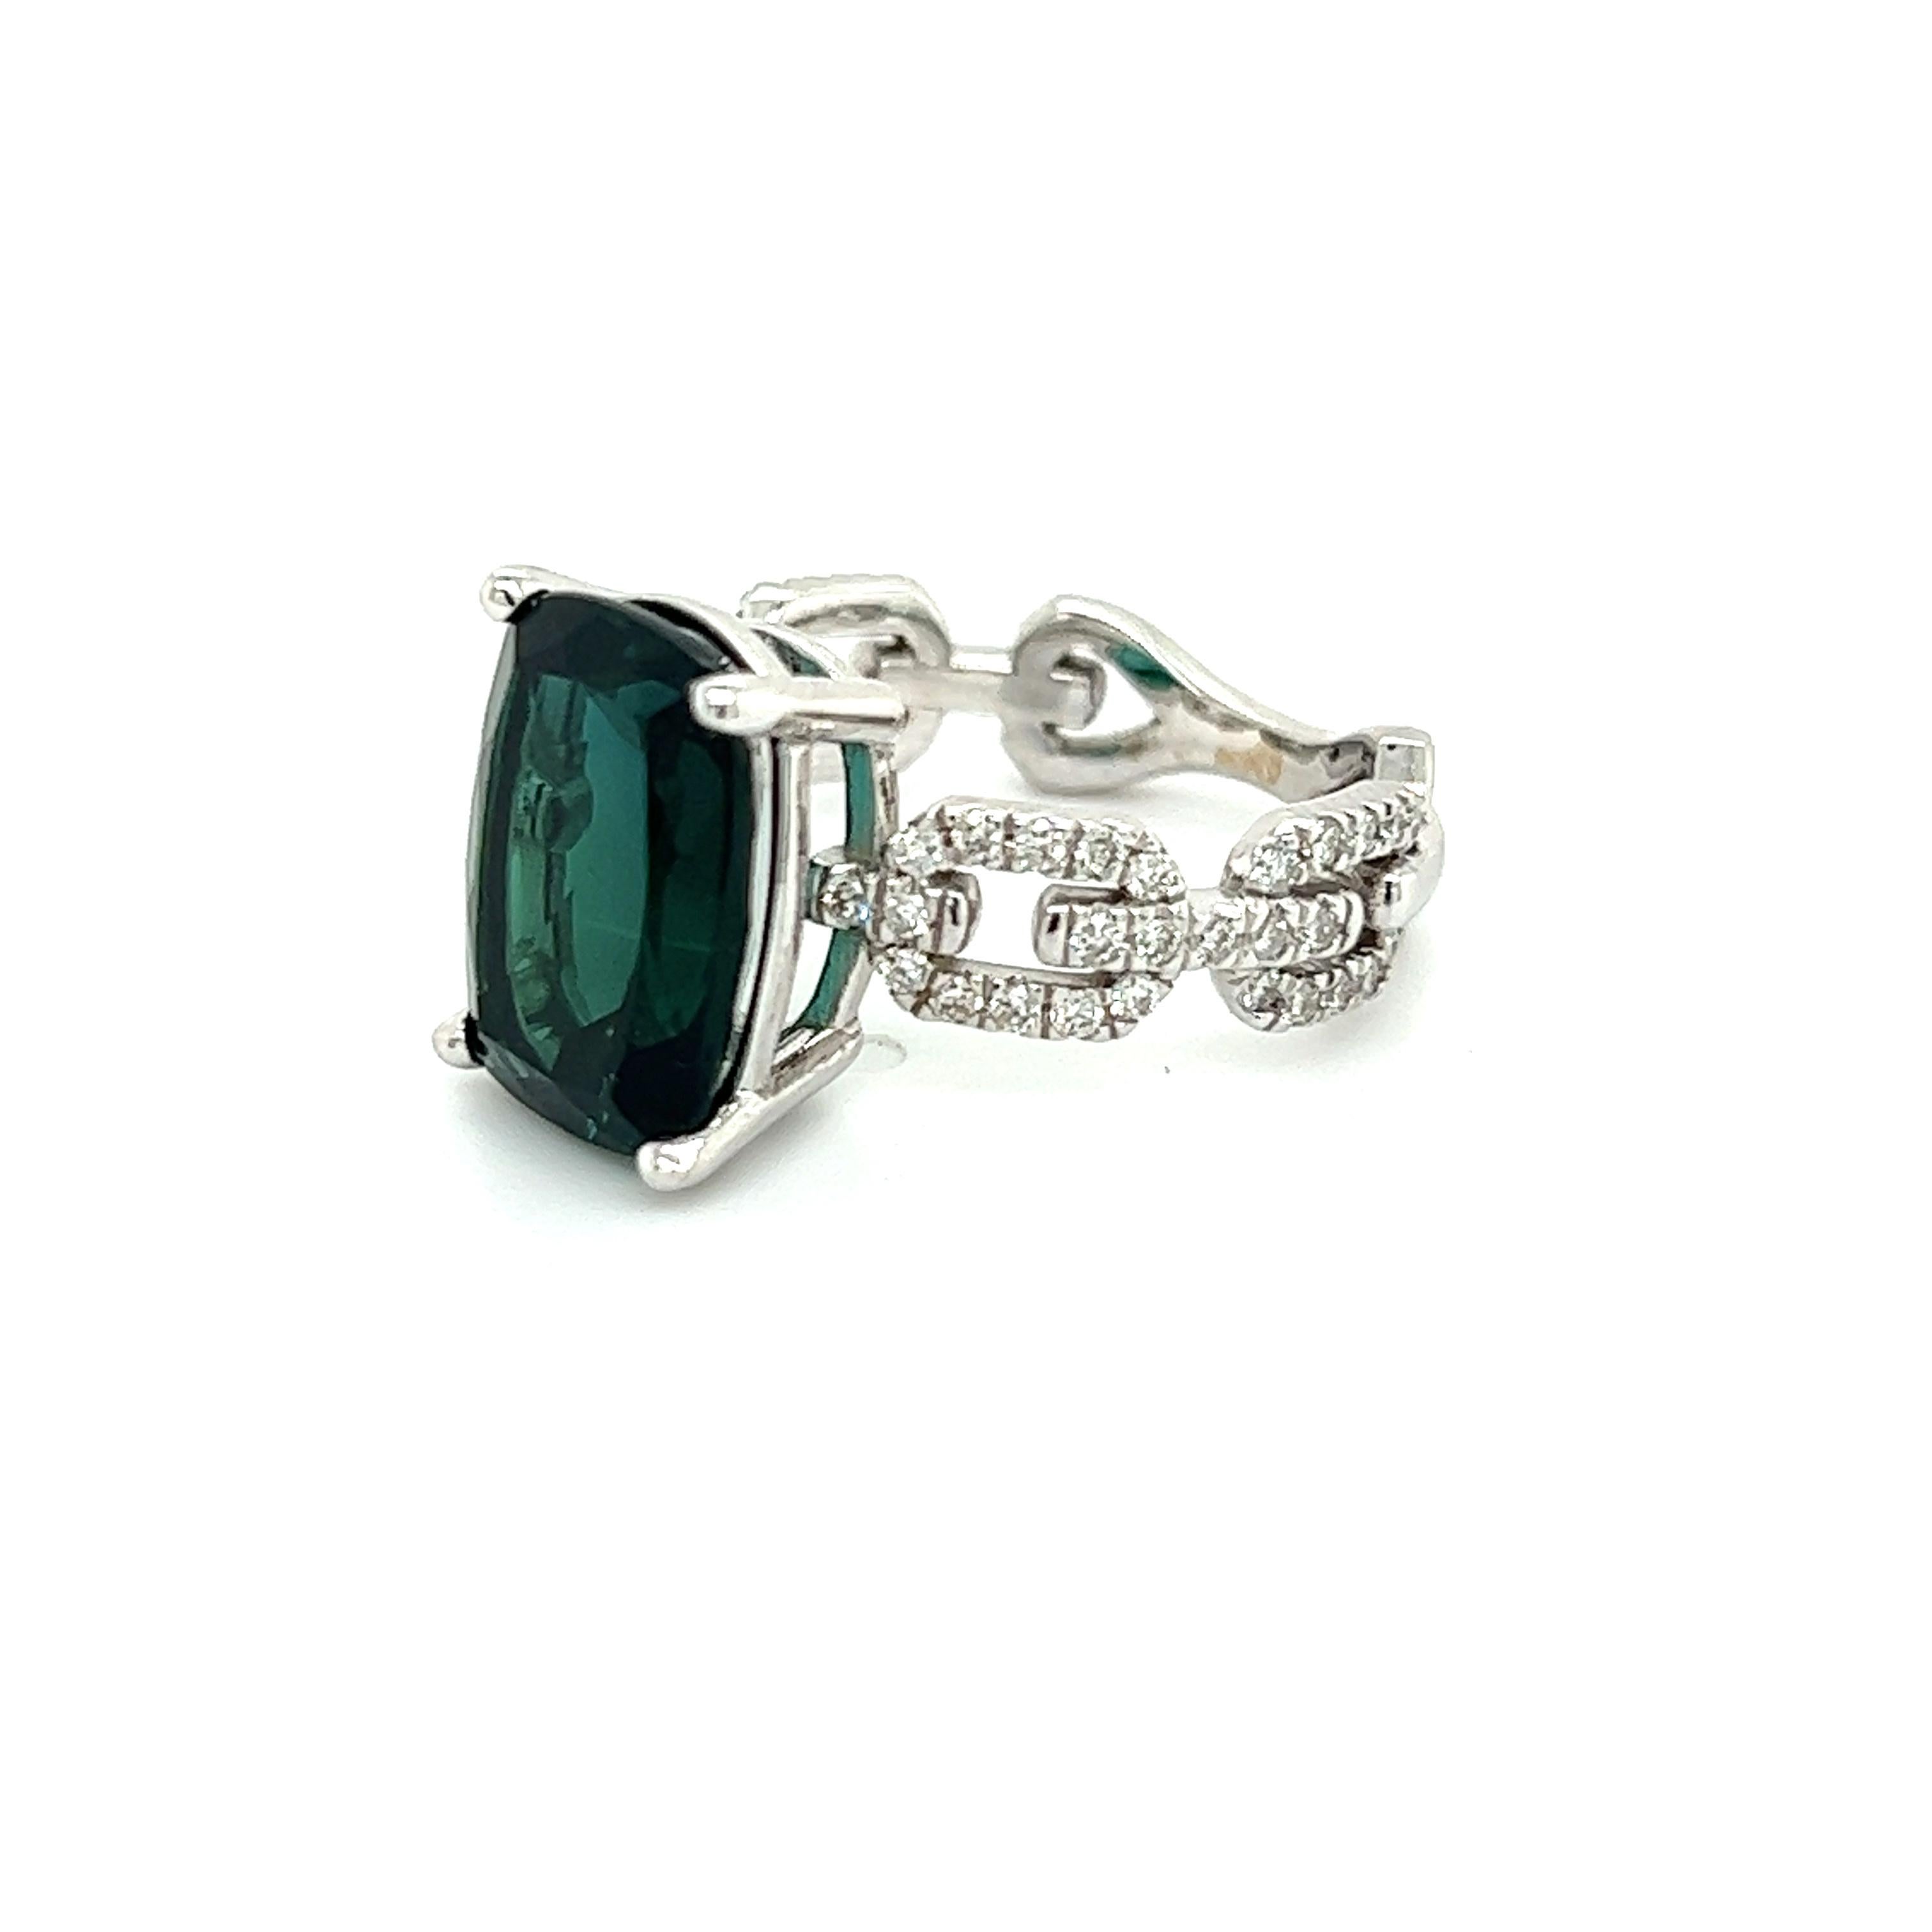 Women's Natural Tourmaline Diamond Ring 6.5 14k White Gold 6.32 TCW Certified For Sale